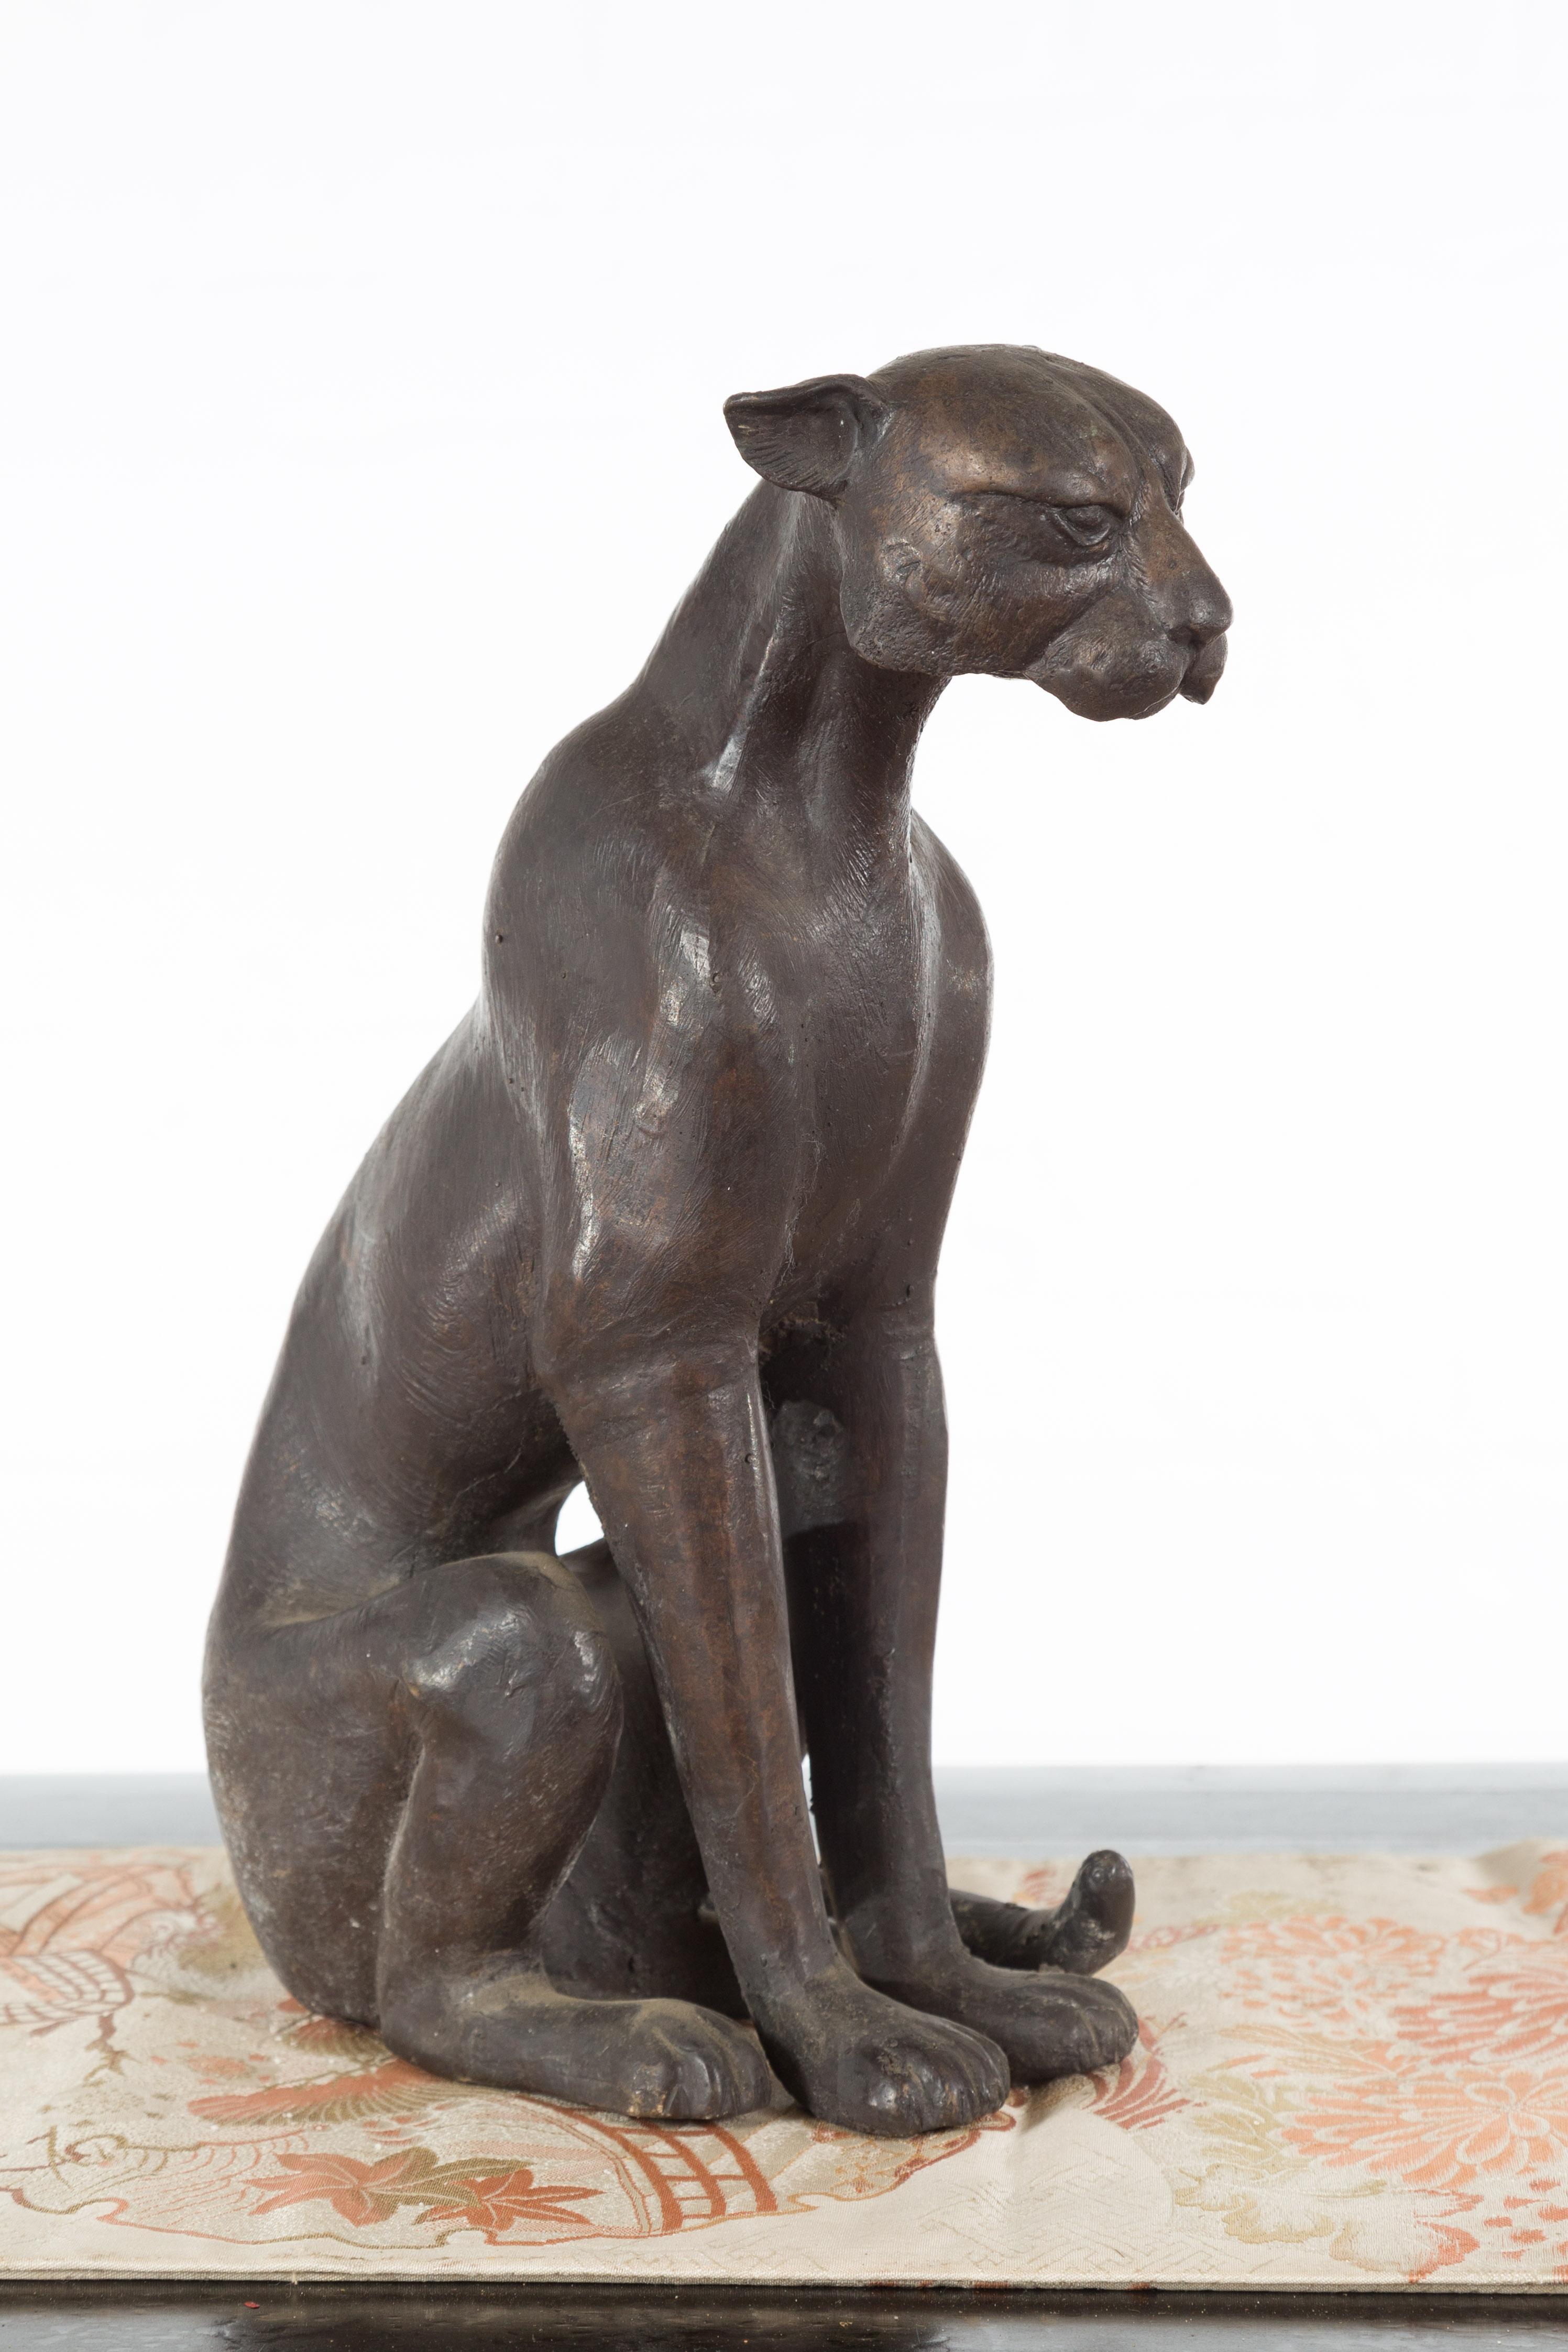 A vintage lost wax cast bronze statue of a cat from the mid 20th century, with bronze patina. We currently have two available, priced and sold individually $790 each. Created with the traditional technique of the lost-wax (à la cire perdue) which